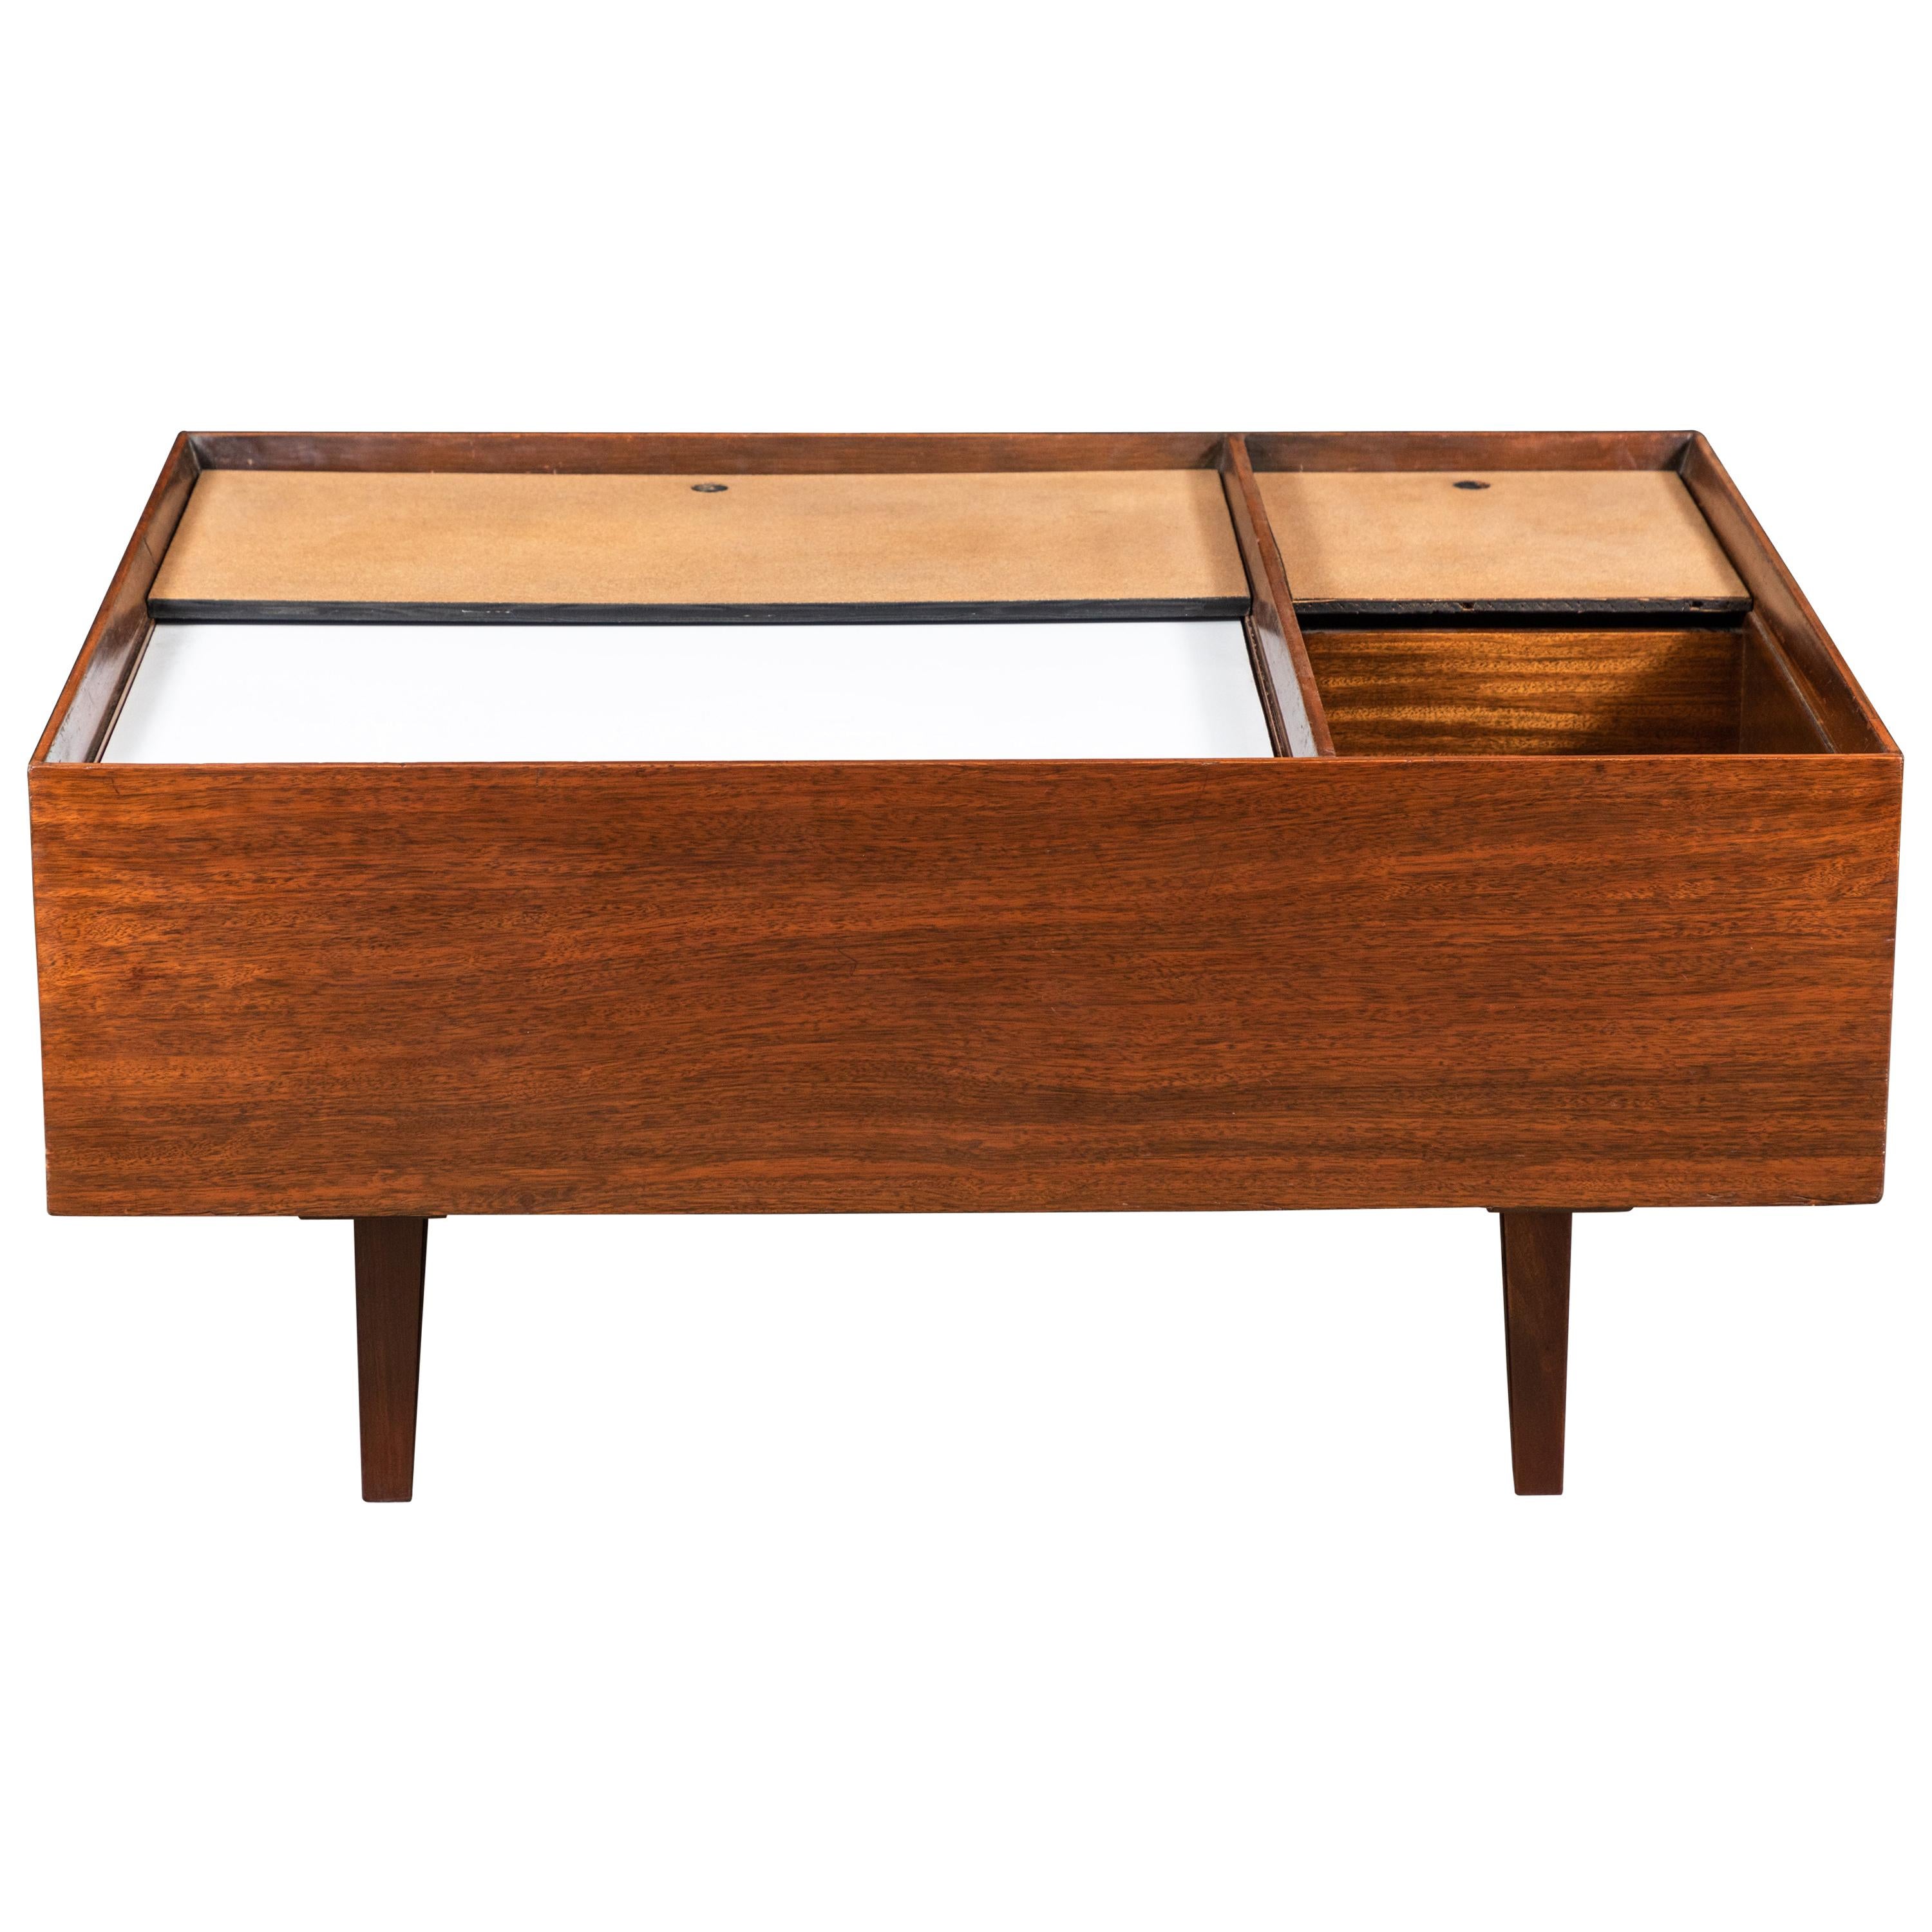 Milo Baughman Coffee Table in Exotic Mindoro Wood for Drexel For Sale